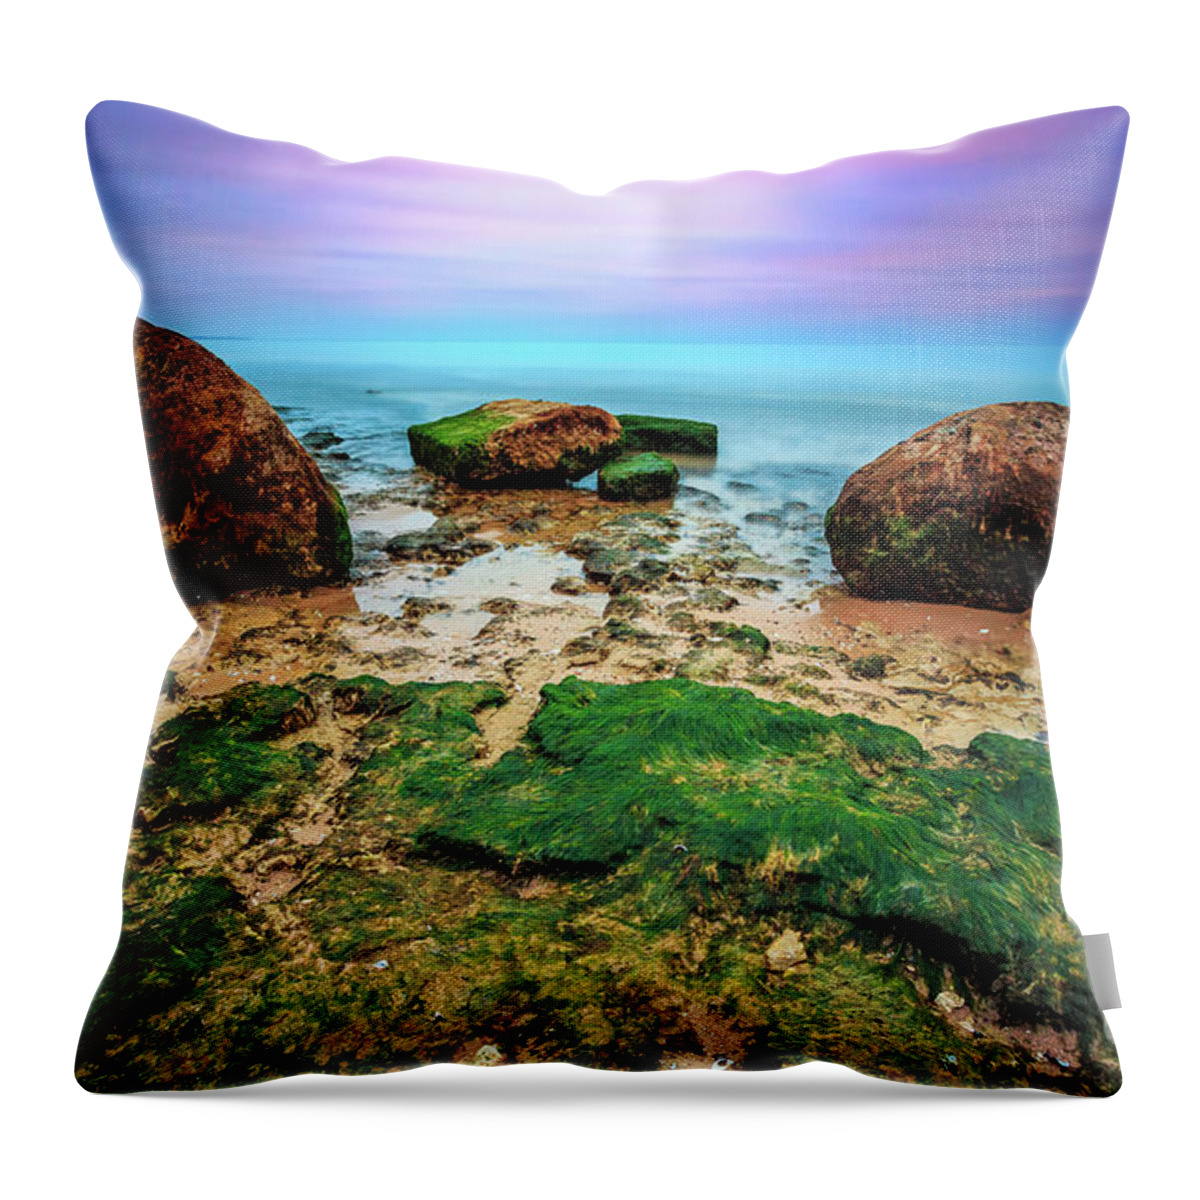 Clouds Throw Pillow featuring the photograph Harrington Hue by Andrew Slater